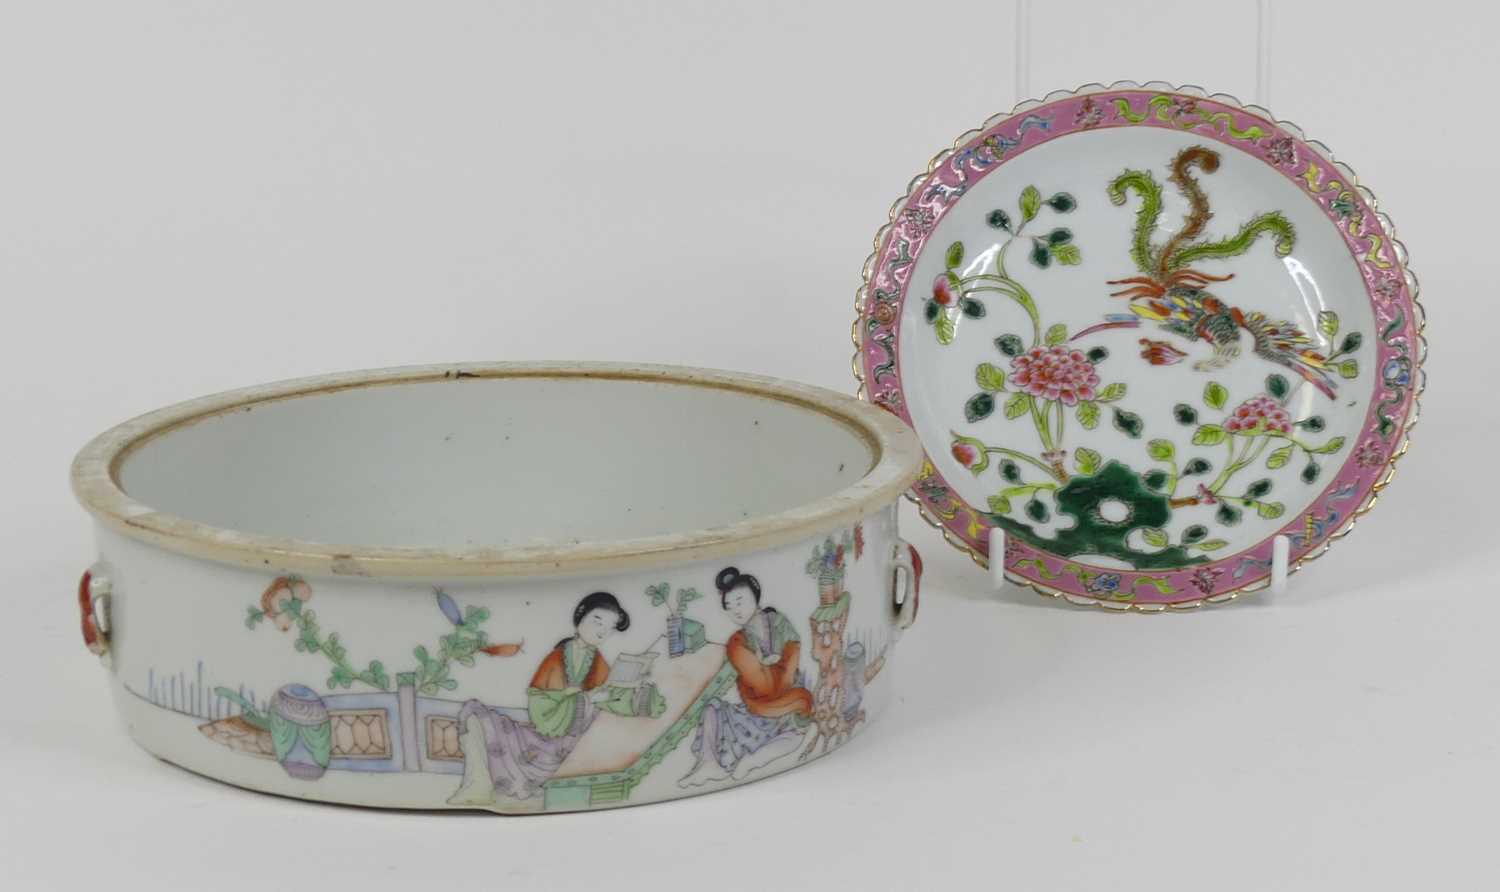 A Chinese republic period porcelain dish, enamel decorated with figures, dia. 22cm, together with